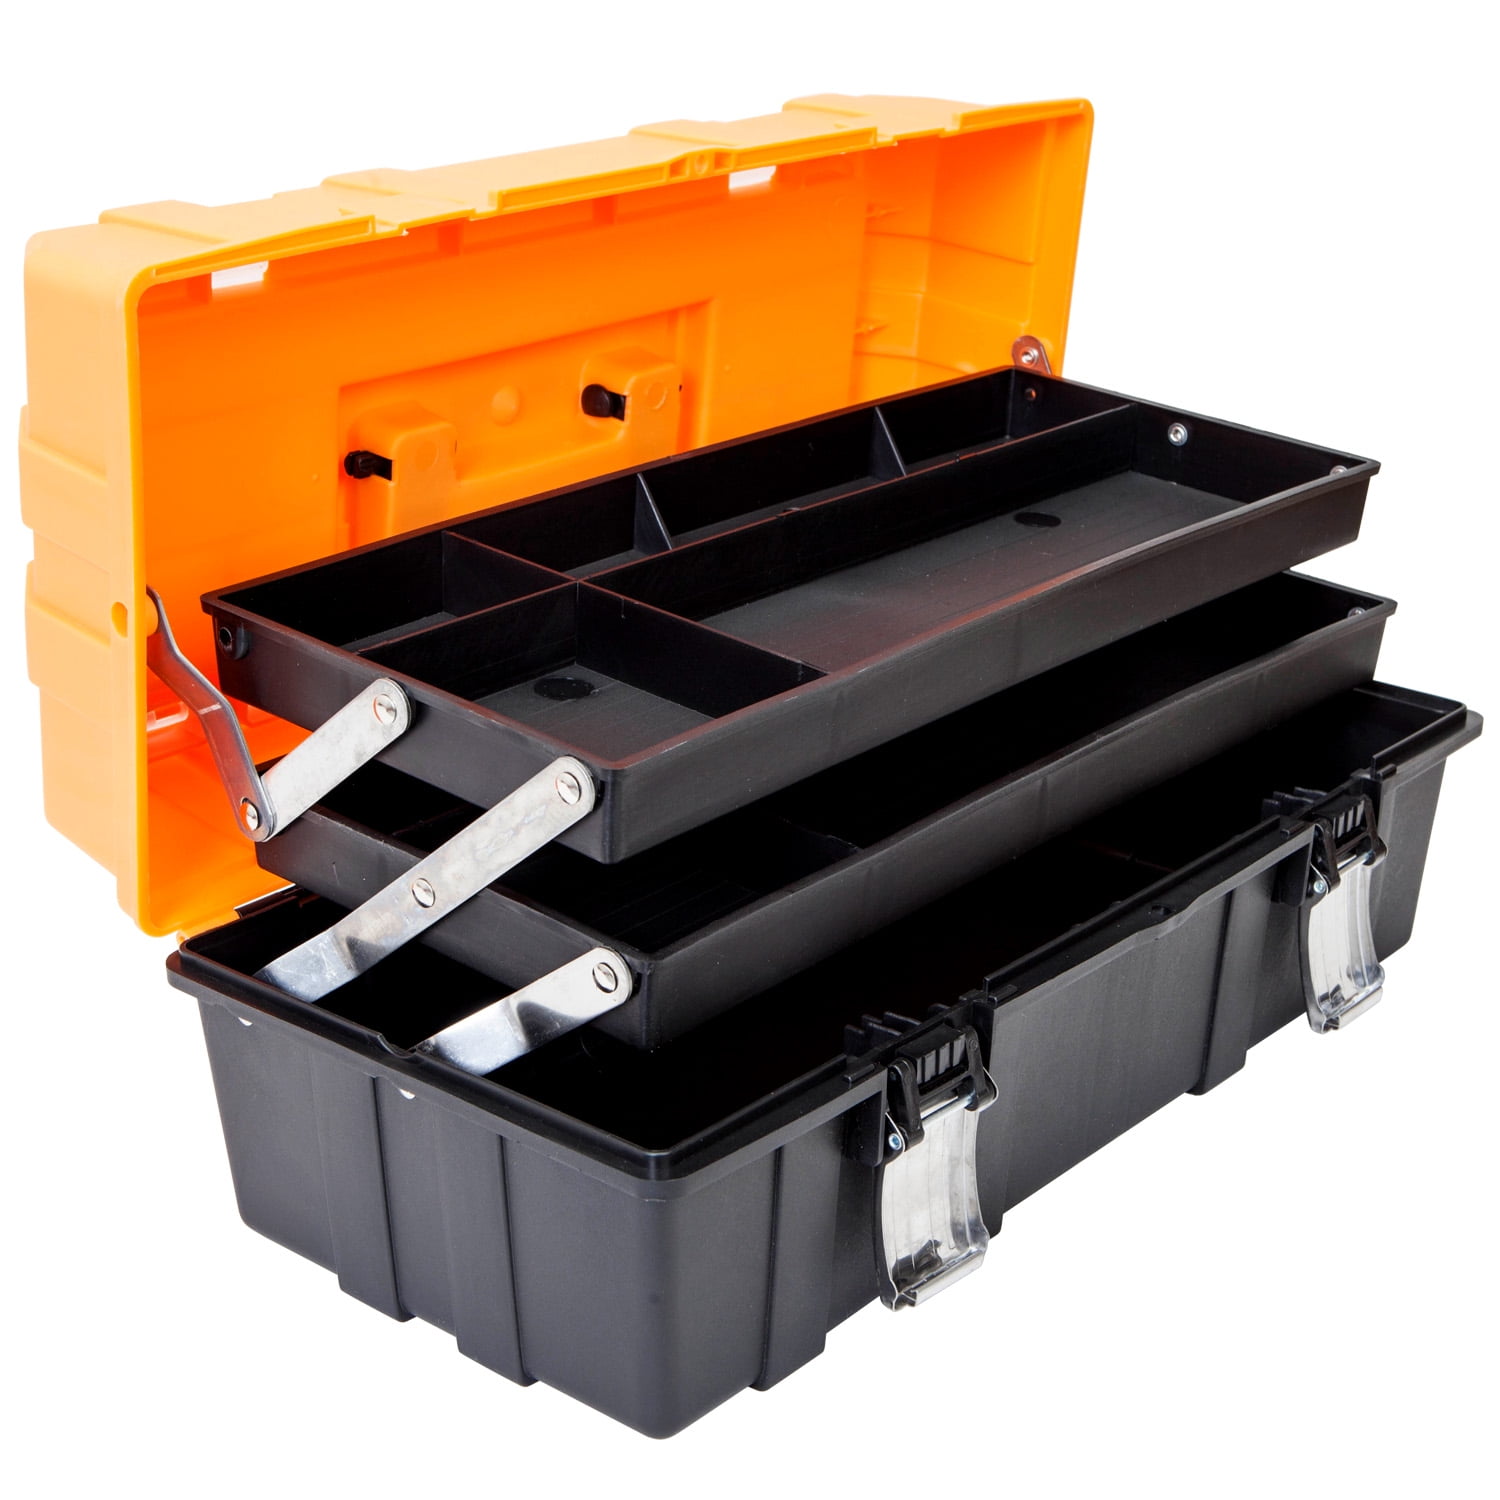 Plastic Toolbox with Organizer Tray and Divider，Household Folding Three-layer Tools Box Organizer WEWLINE Portable Multi-function Tool Box 